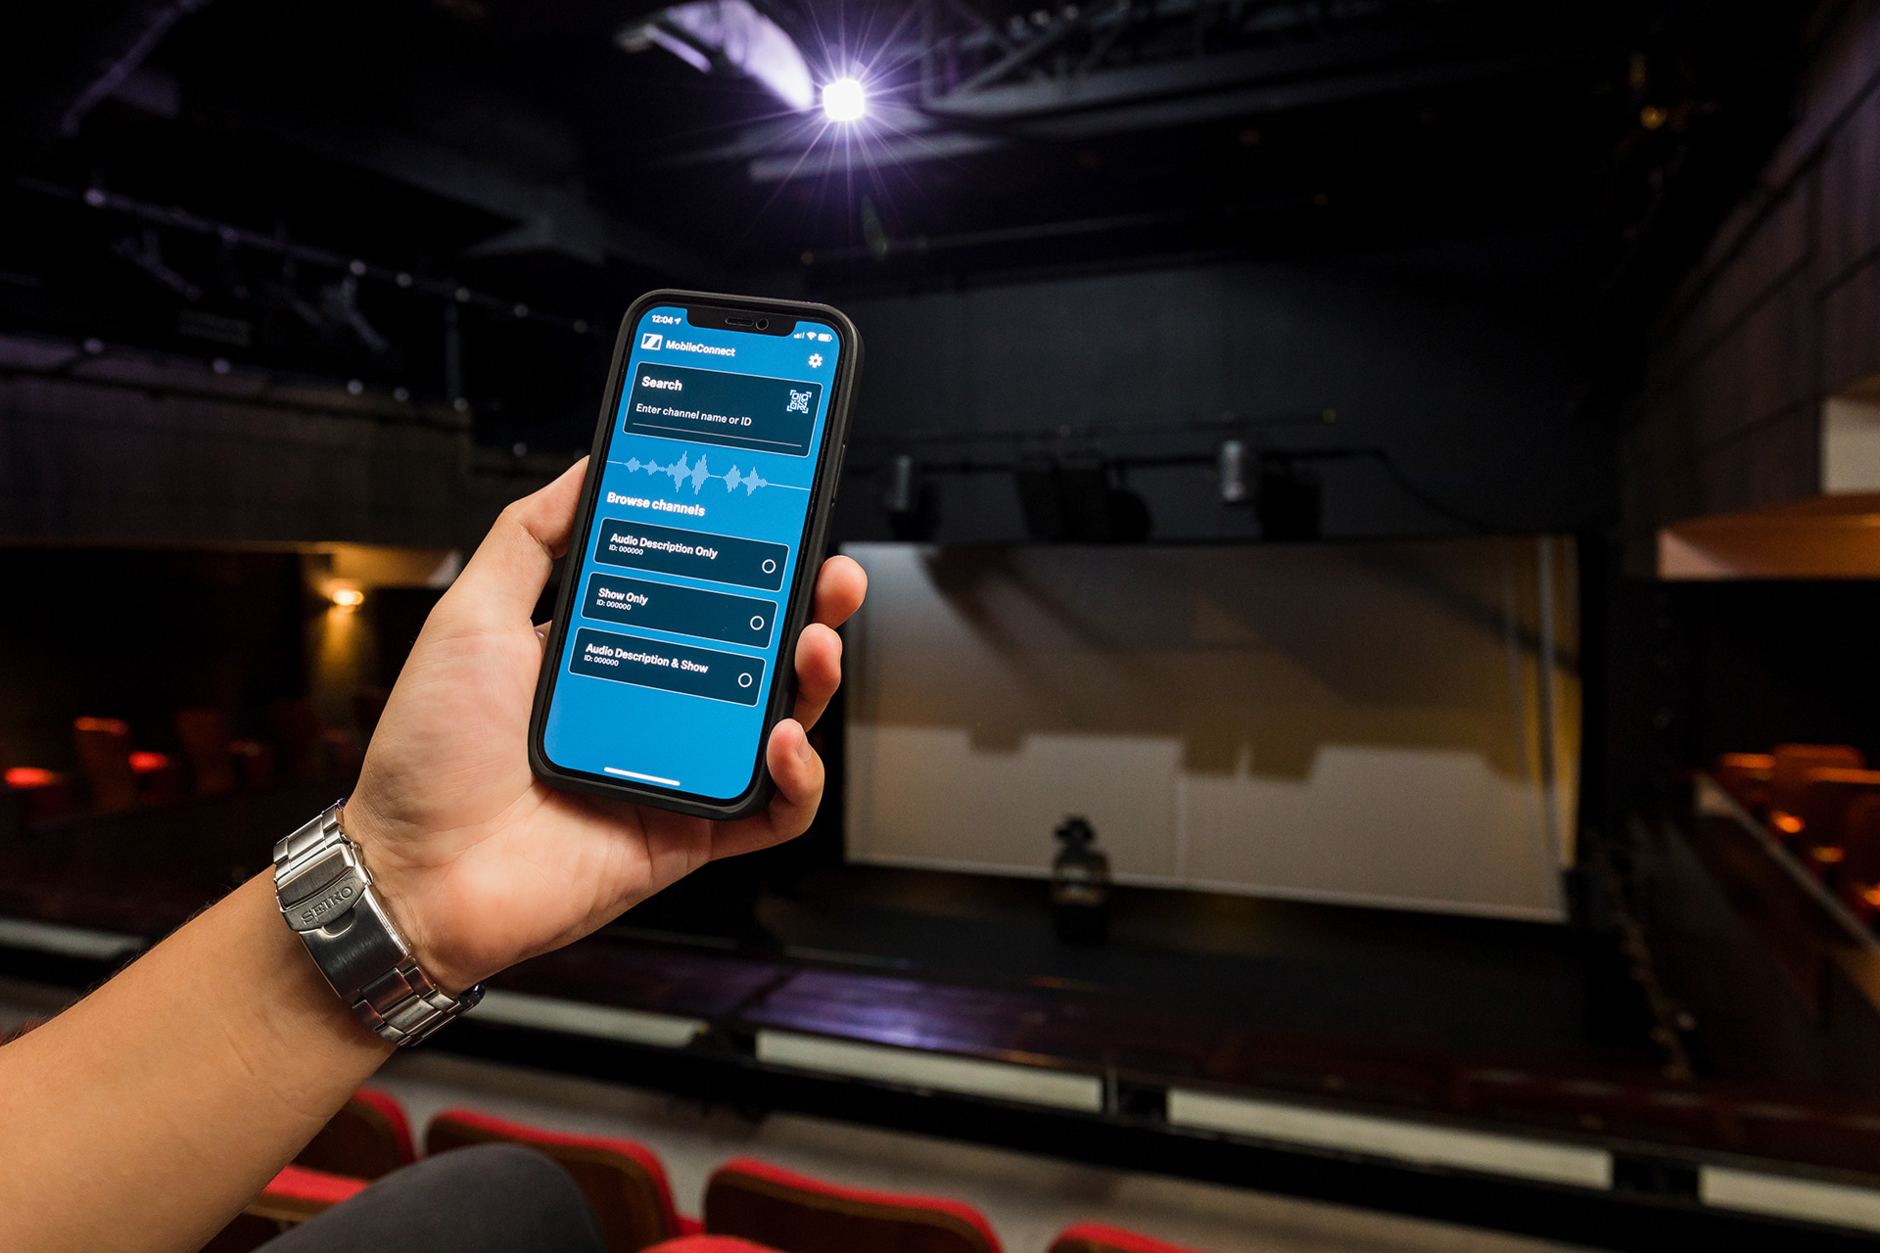 singapore-repertory-theatre-with-mobileconnect-app-on-phone-theatre-hall.jpg